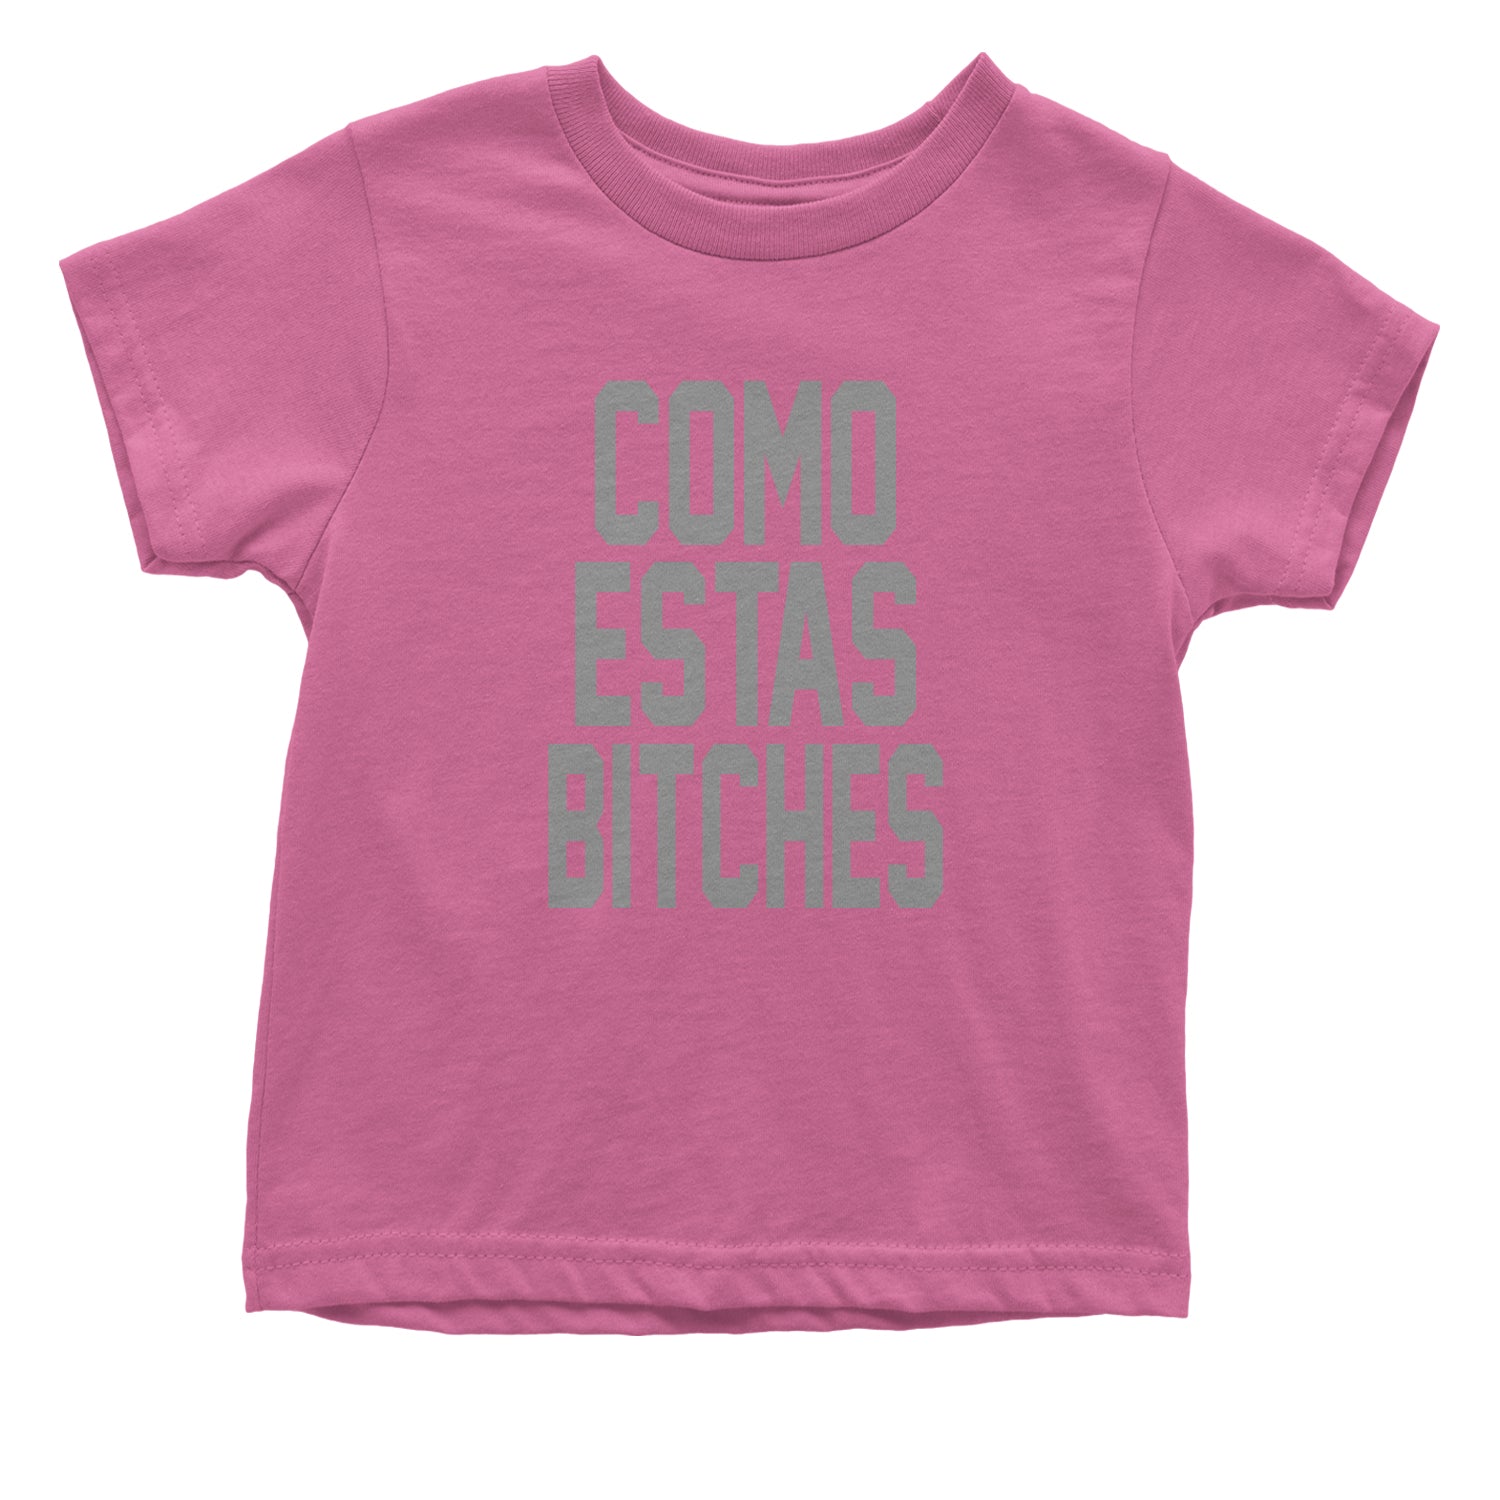 Como Estas B-tches Infant One-Piece Romper Bodysuit and Toddler T-shirt #expressiontees by Expression Tees